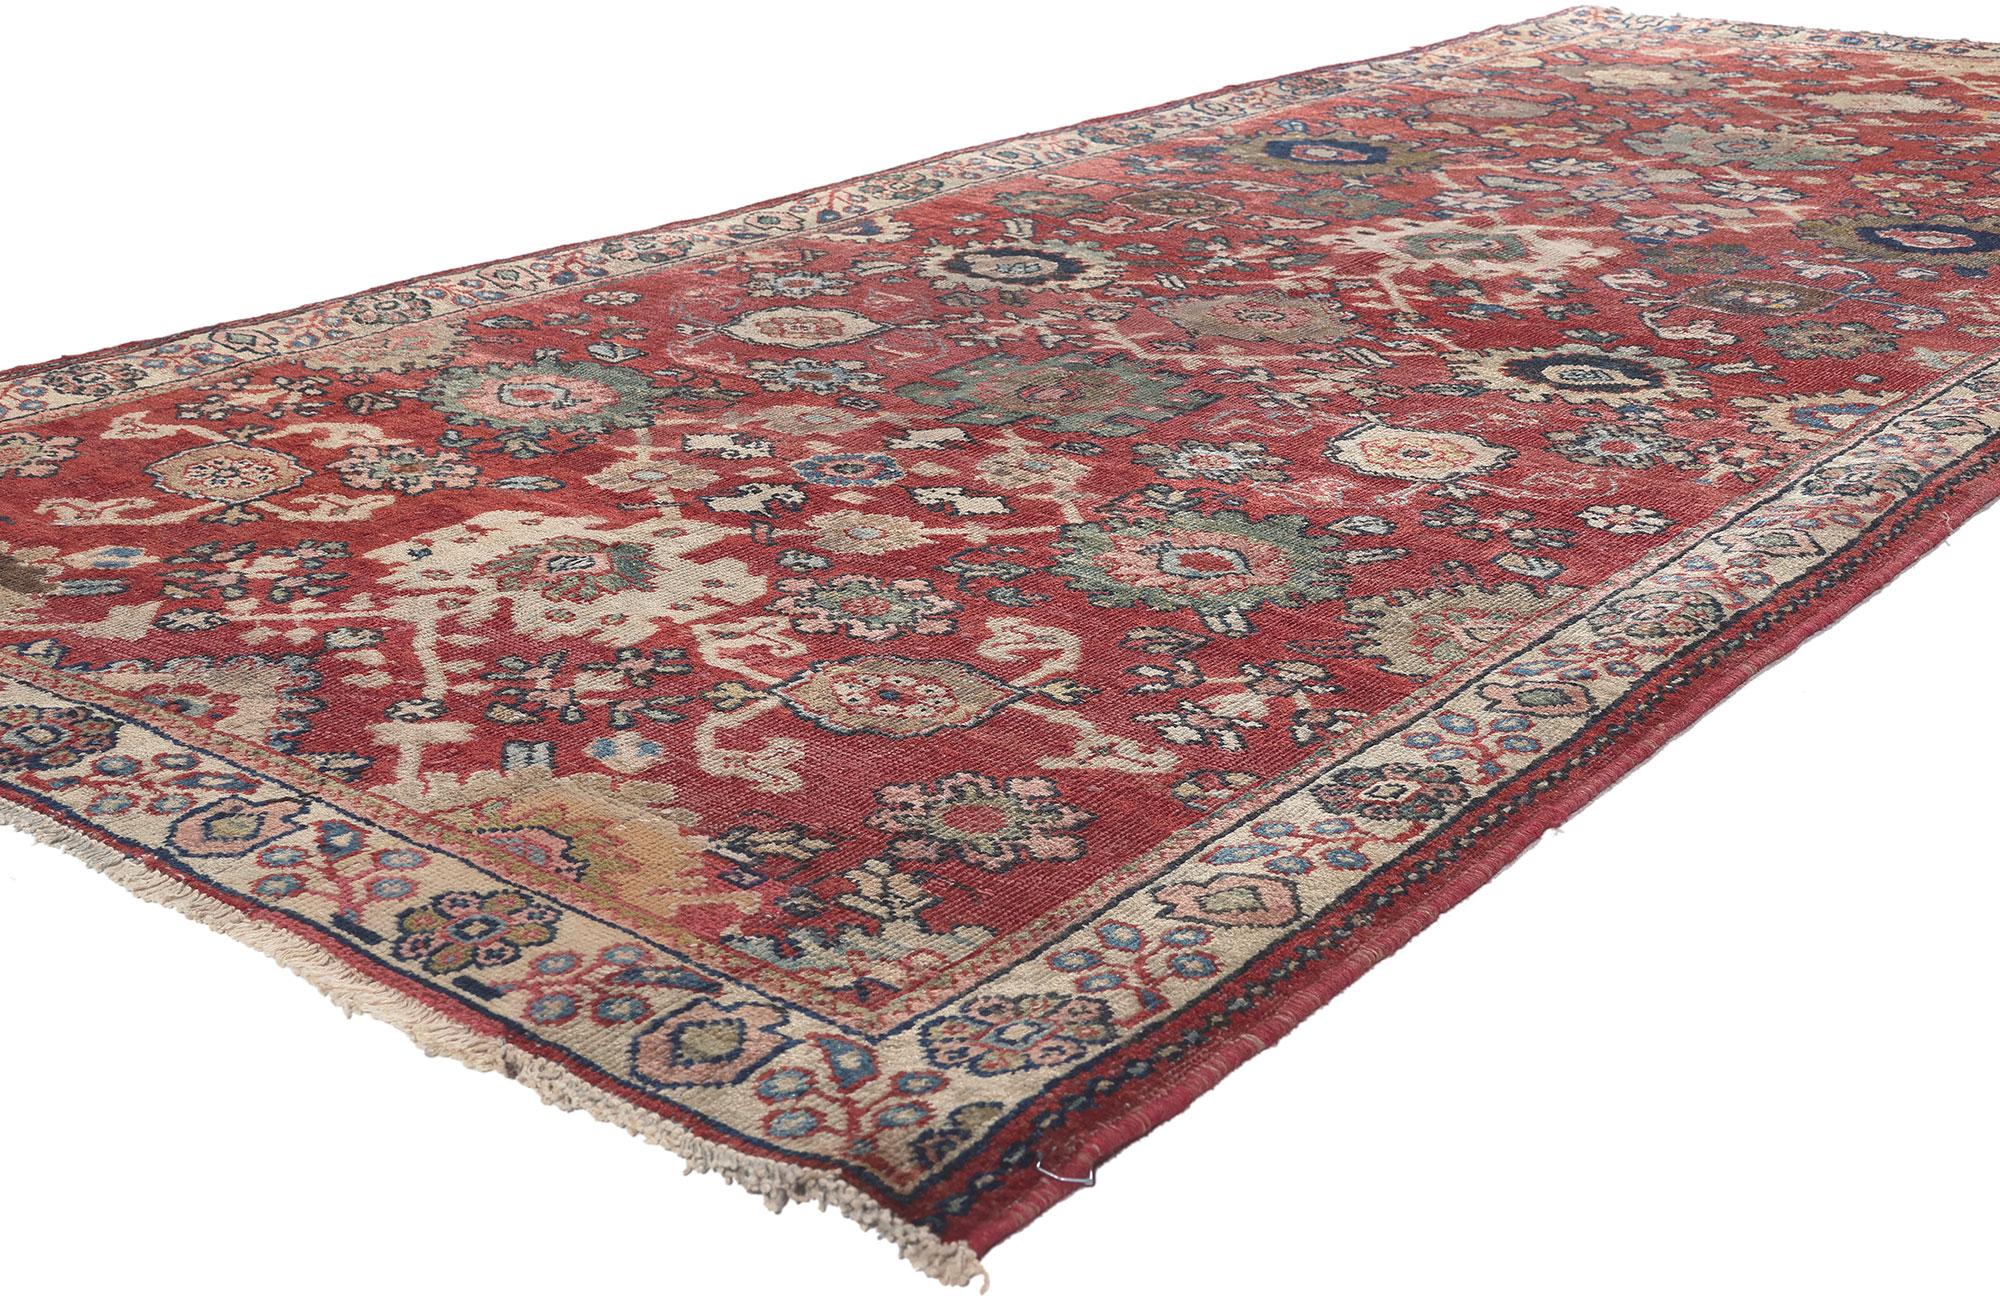 75346 Rustic Vintage Persian Mahal Rug, 04'04 X 10'02.
Rustic sensibility meets effortlessly chic in this vintage Persian Mahal rug. The distinctive design and traditional color palette woven into this piece work together creating a rustic yet